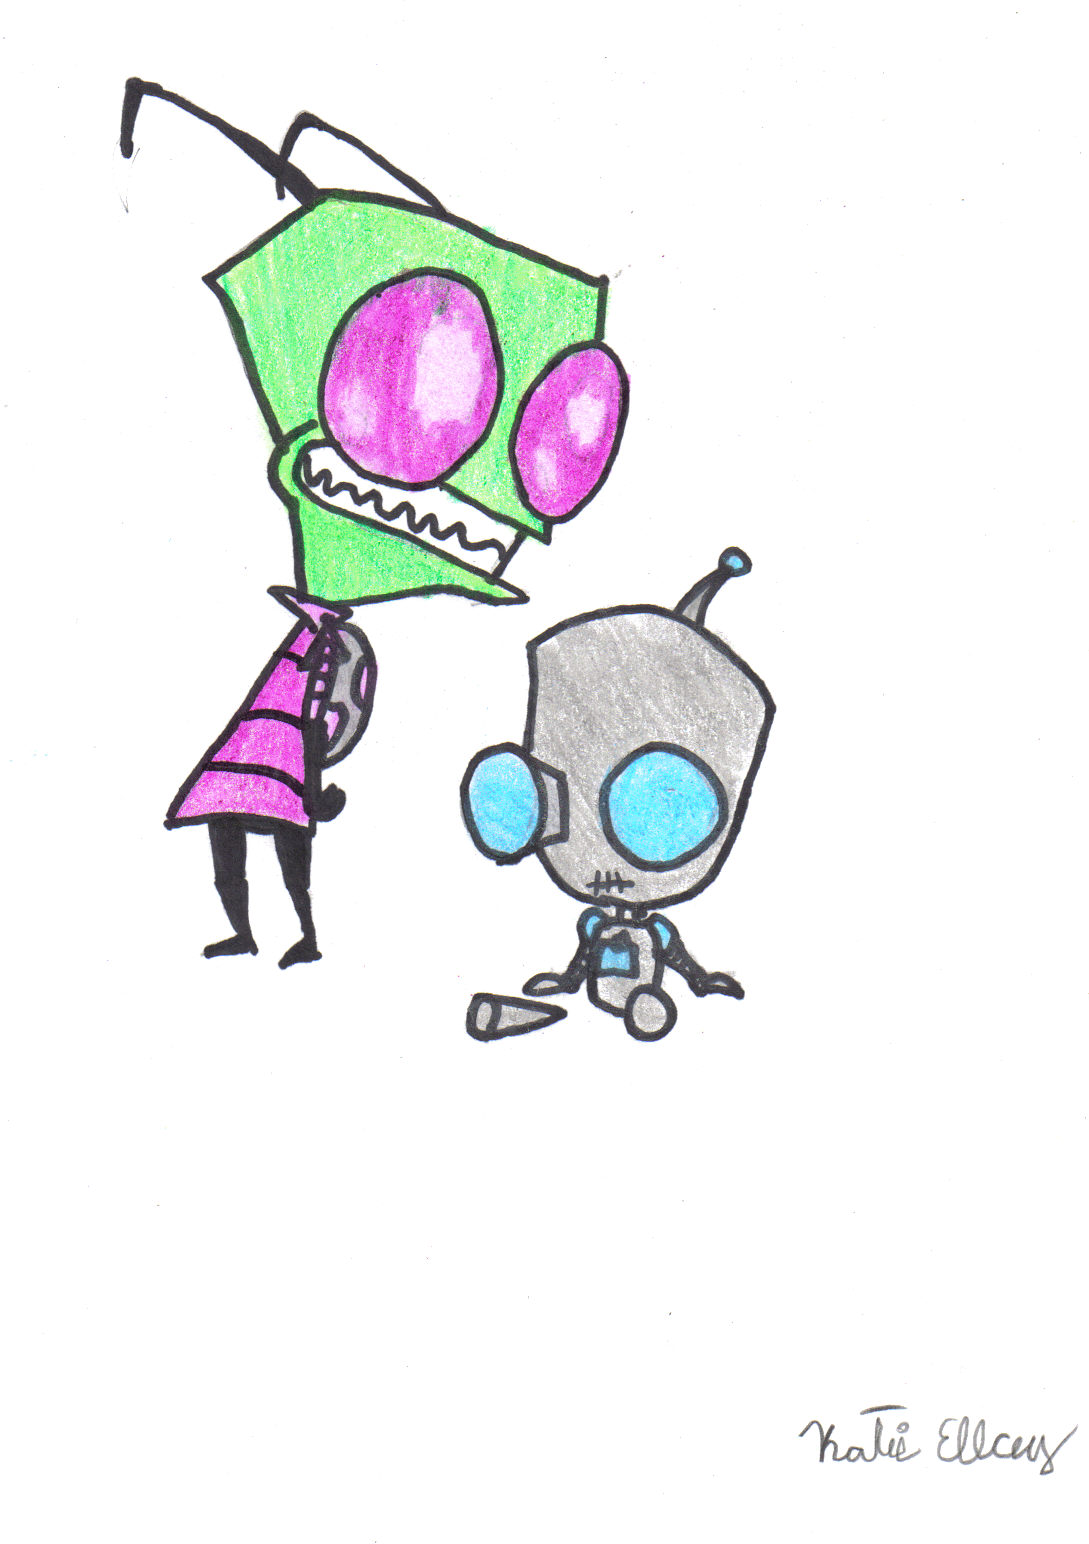 zim and gir by Jthm_girl